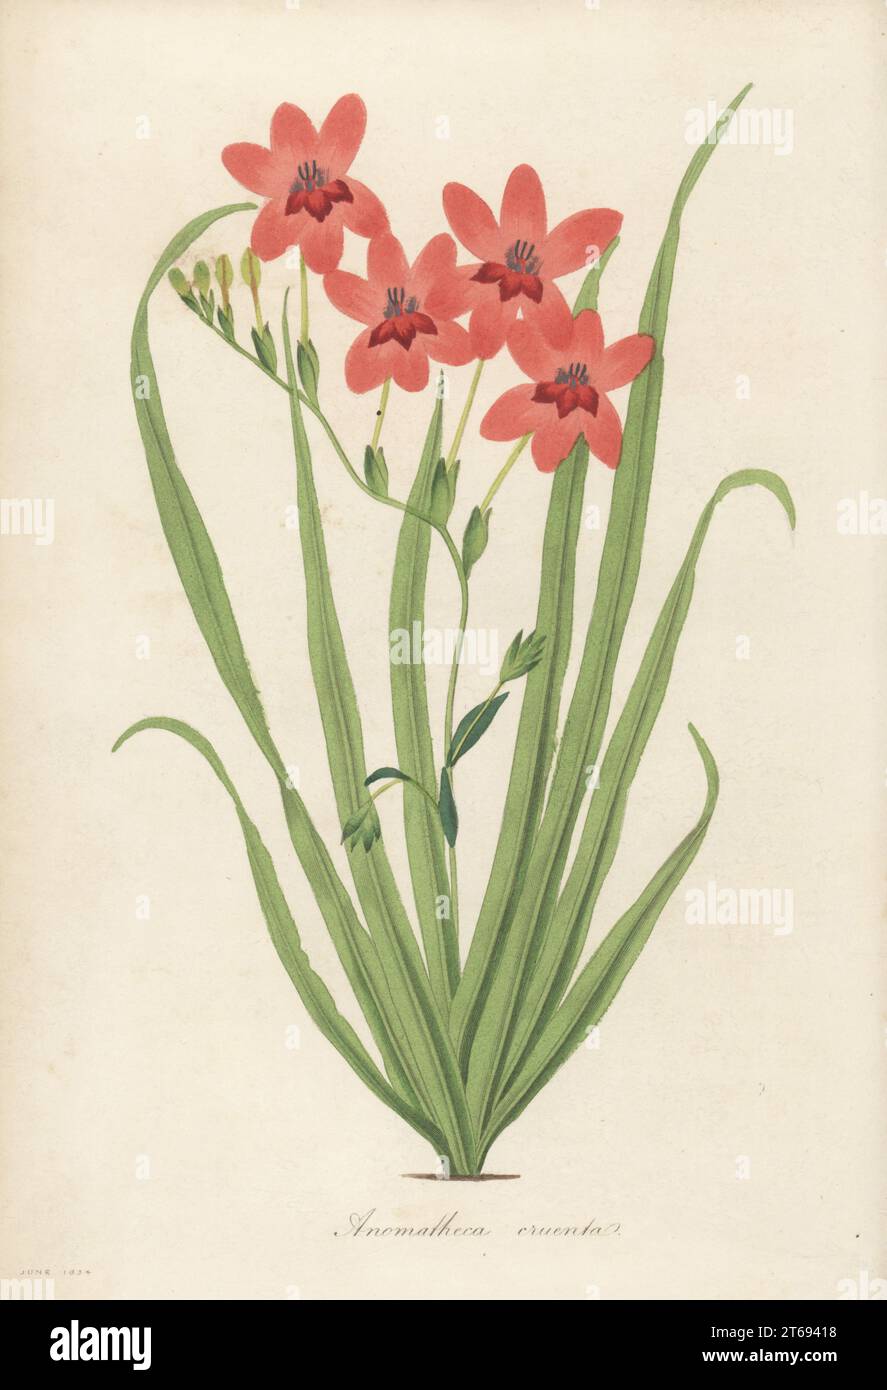 Flowering grass, Freesia laxa. Native to the Cape of Good Hope, South Africa. Blood-spotted anomatheca, Anomatheca cruenta. Handcoloured engraving from Joseph Paxtons Magazine of Botany, and Register of Flowering Plants, Volume 1, Orr and Smith, London, 1834. Stock Photo